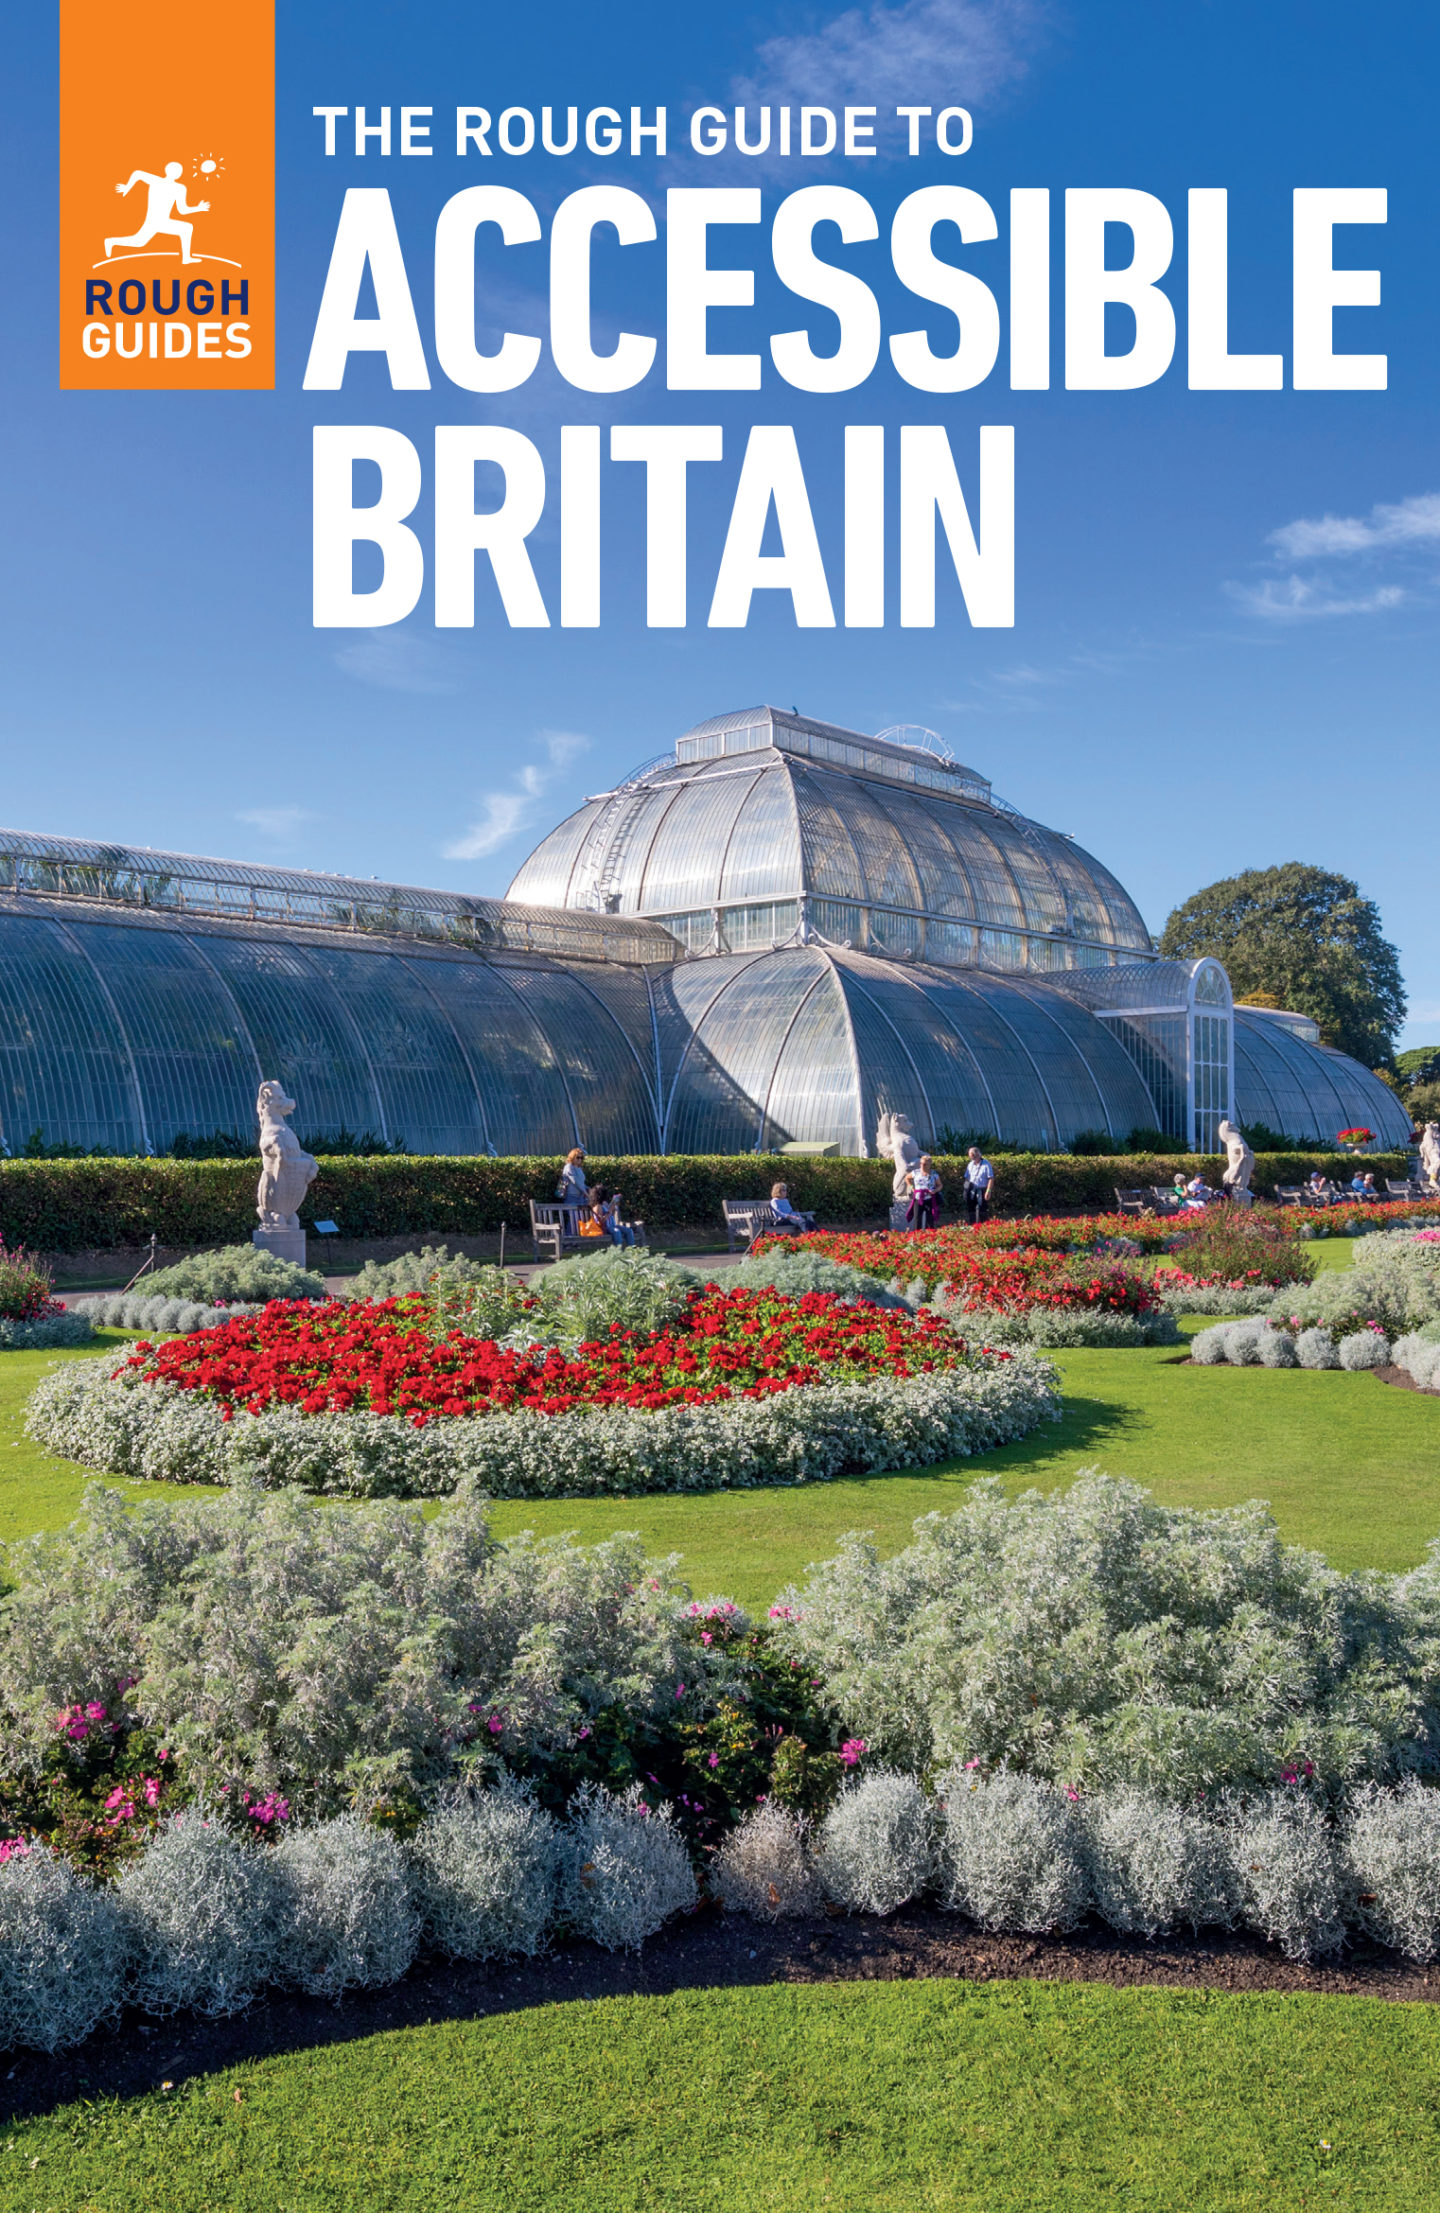 visit britain accessibility guide